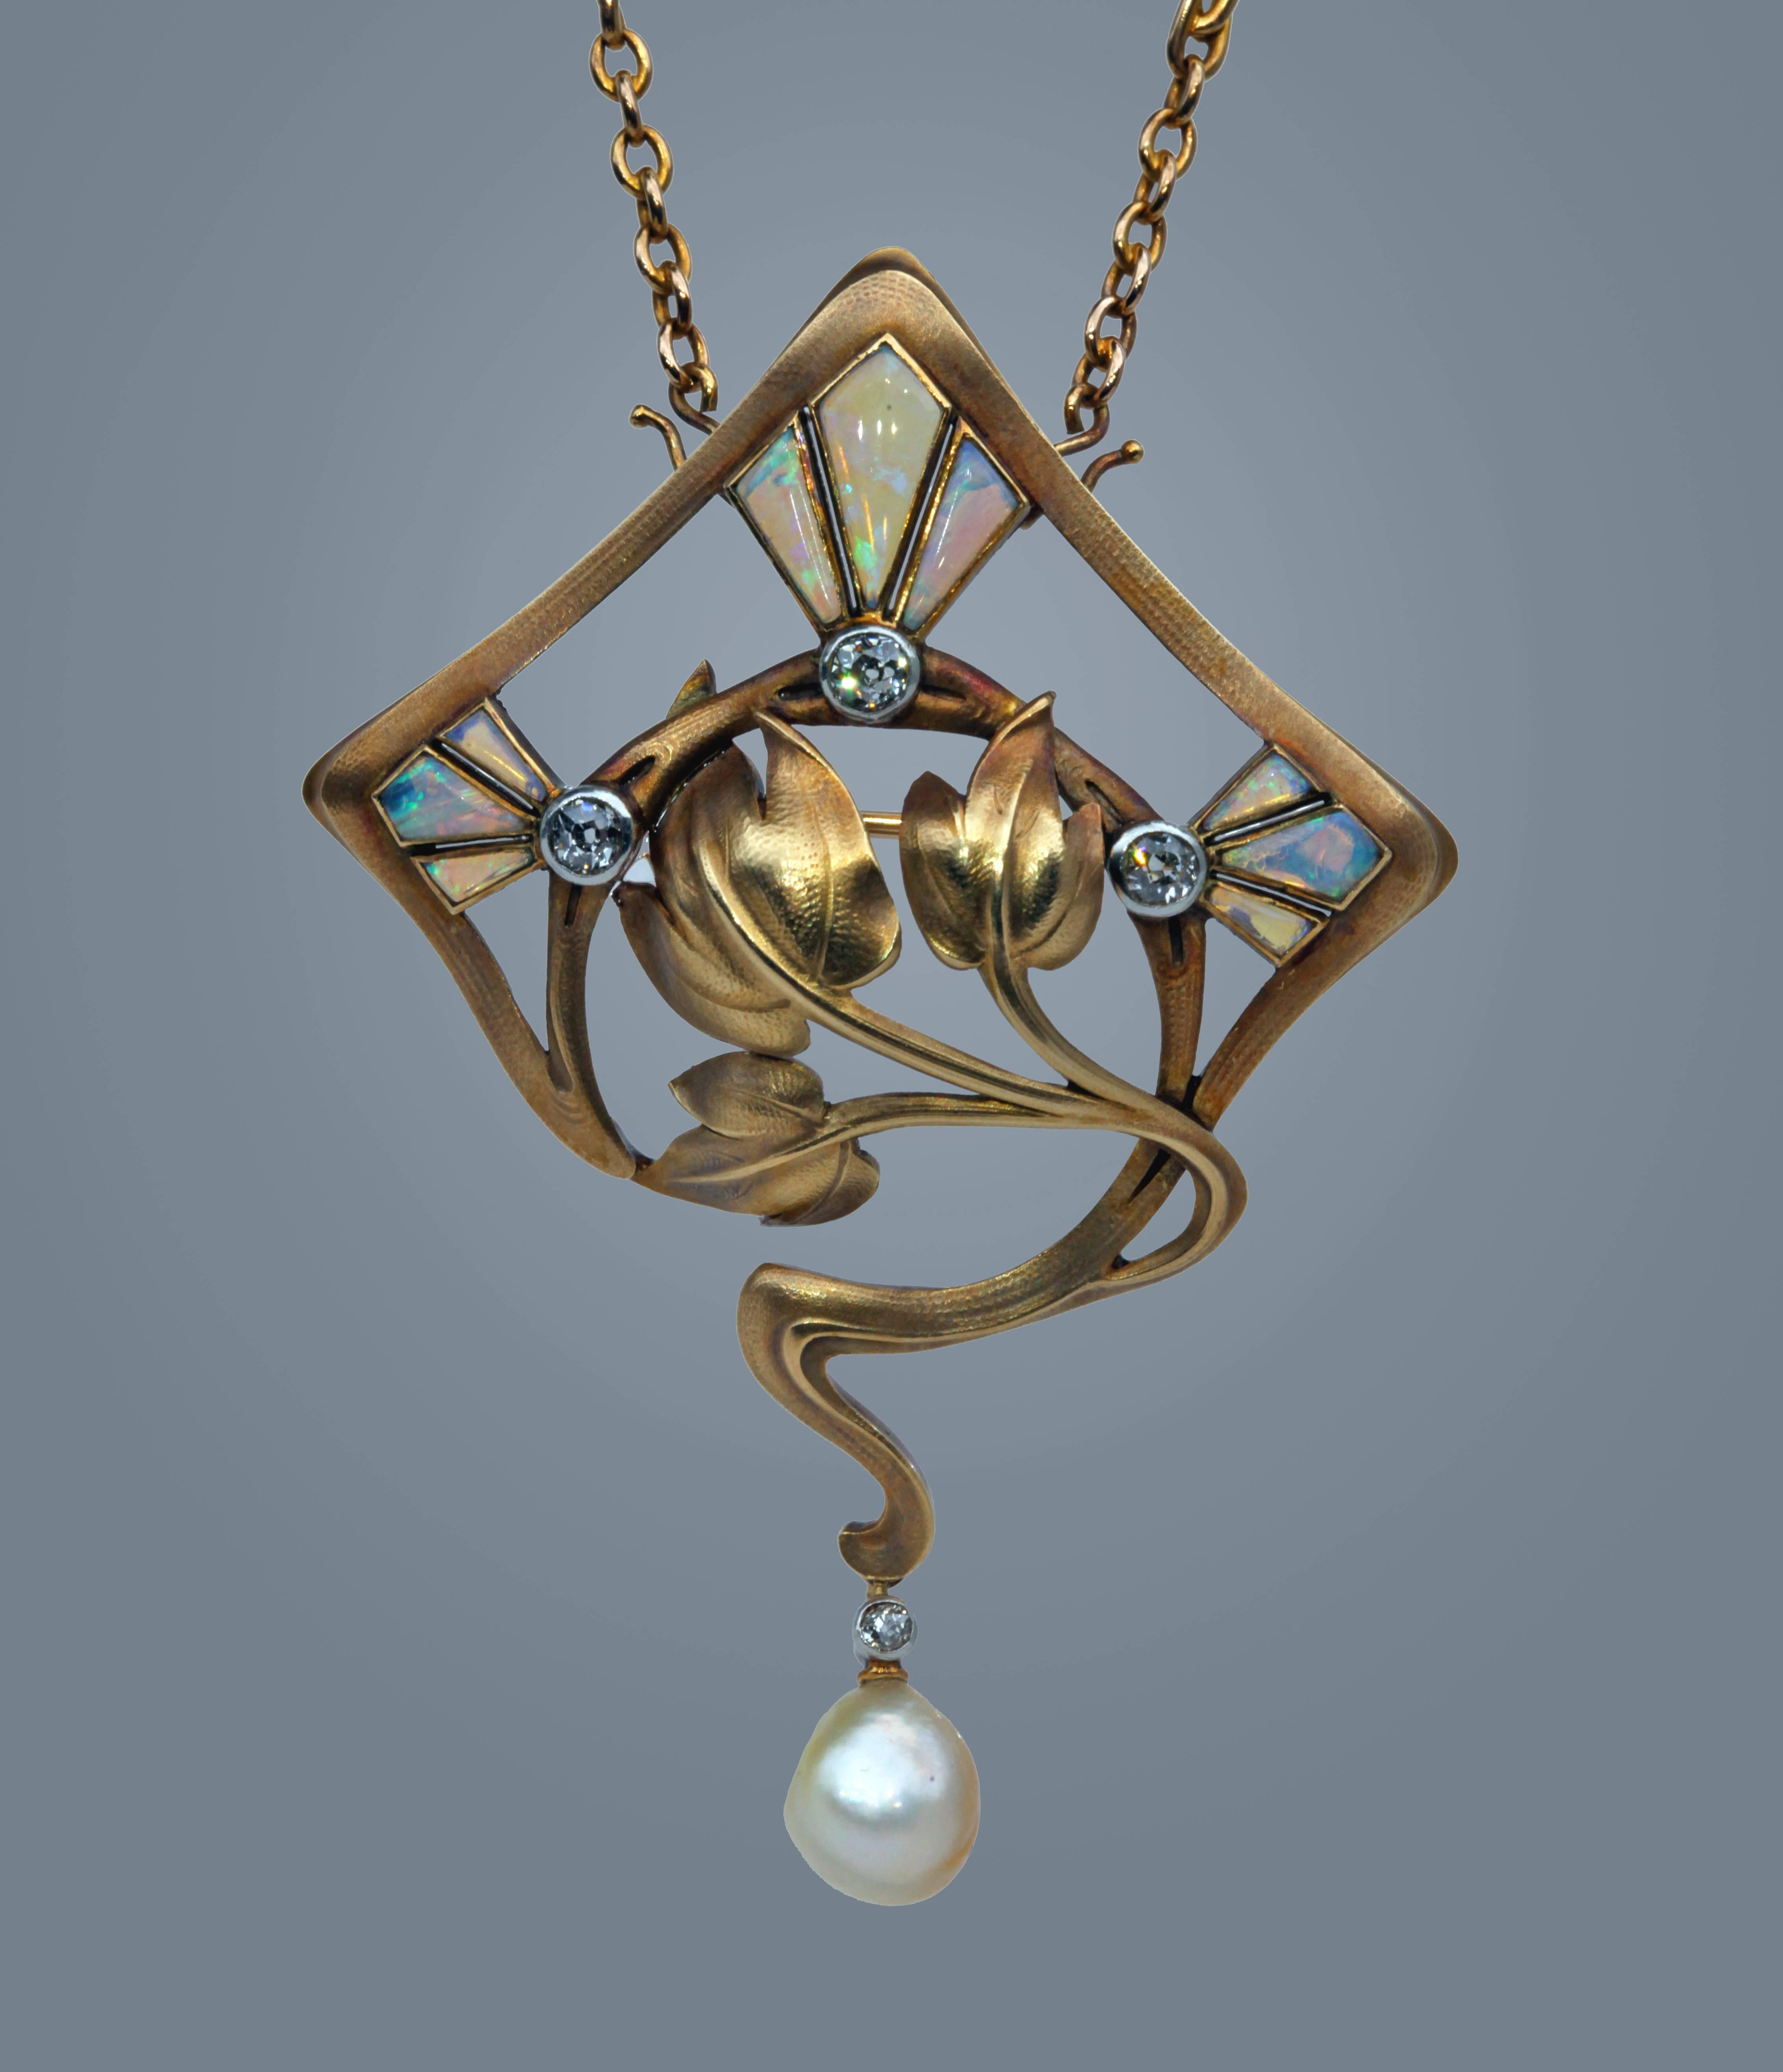 Beautiful pendant in the manner of Georges Fouquet.
Removable chain for wear as a brooch.
There are radical design elements associated with Fouquet, Lalique, Guimard & Colonna featuring opal plique a jour & diamond with comet detail that